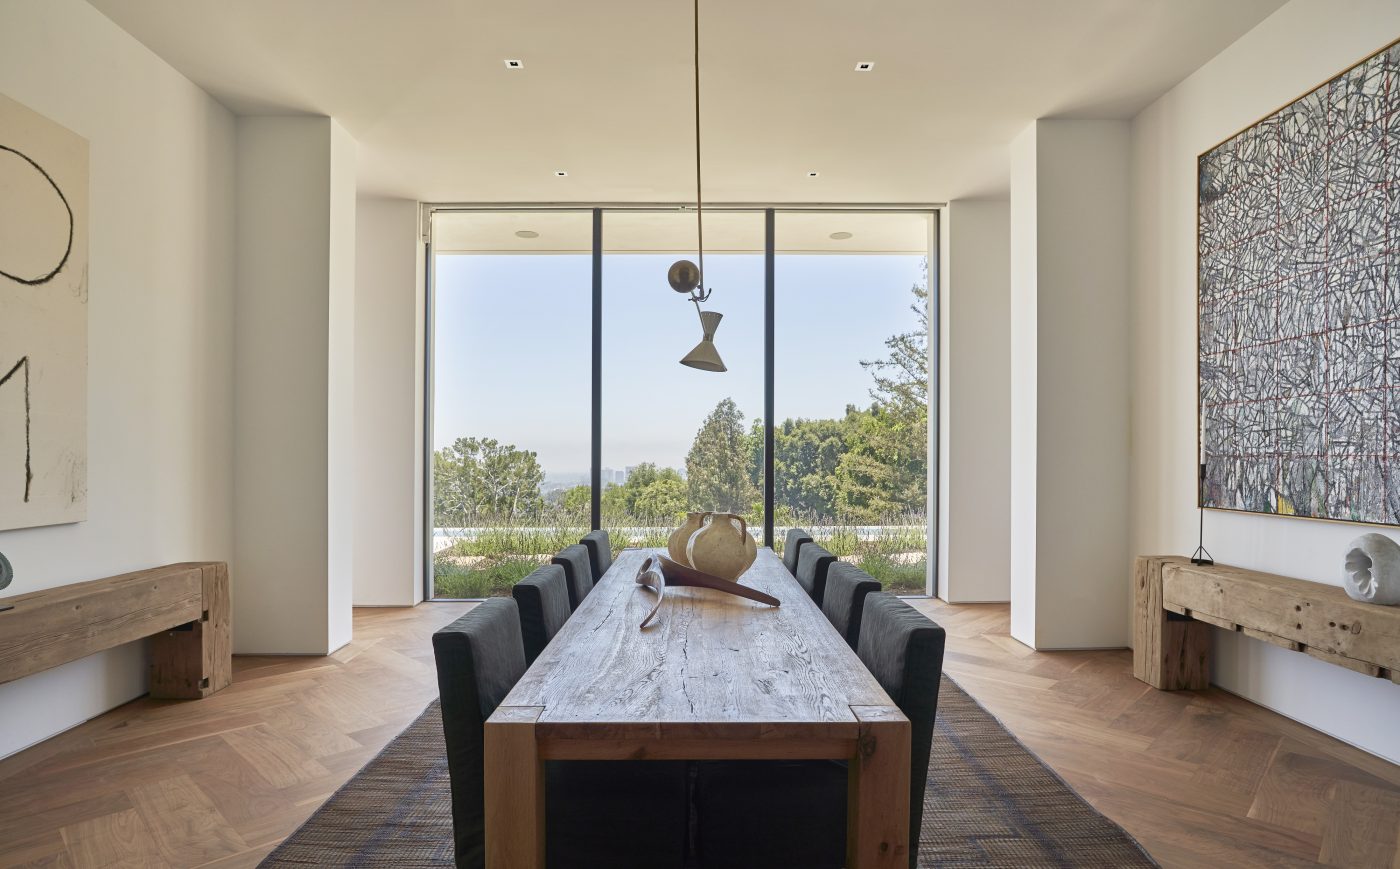 Dining room designed by Mulholland